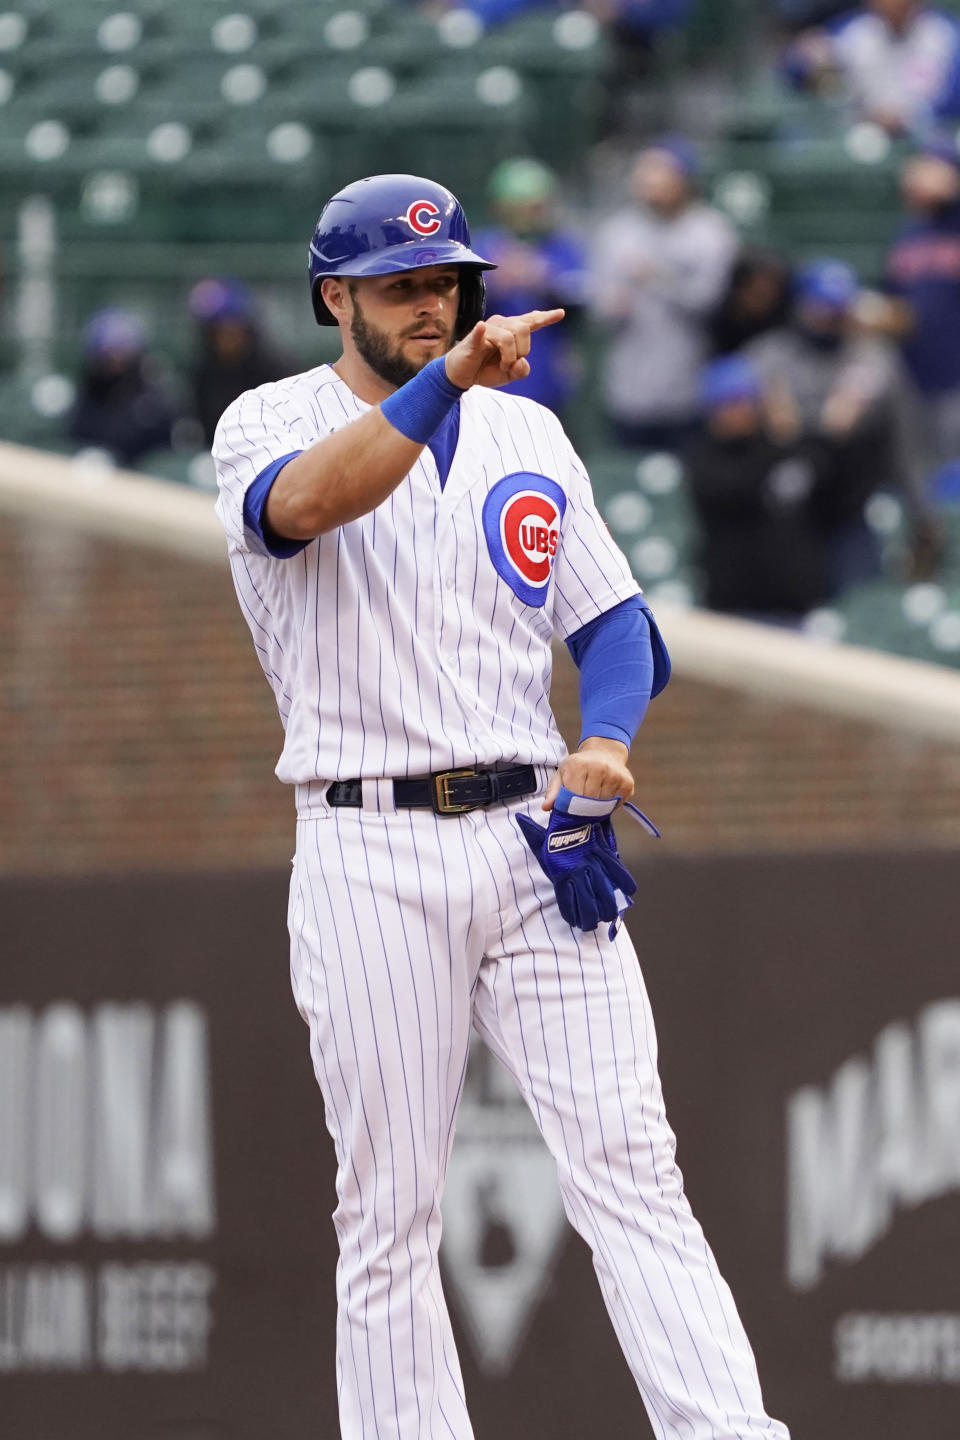 Chicago Cubs' David Bote gestures after hitting a three run double against the Los Angeles Dodgers during the first inning of the first baseball game of a doubleheader Tuesday, May, 4, 2021, in Chicago. (AP Photo/David Banks)